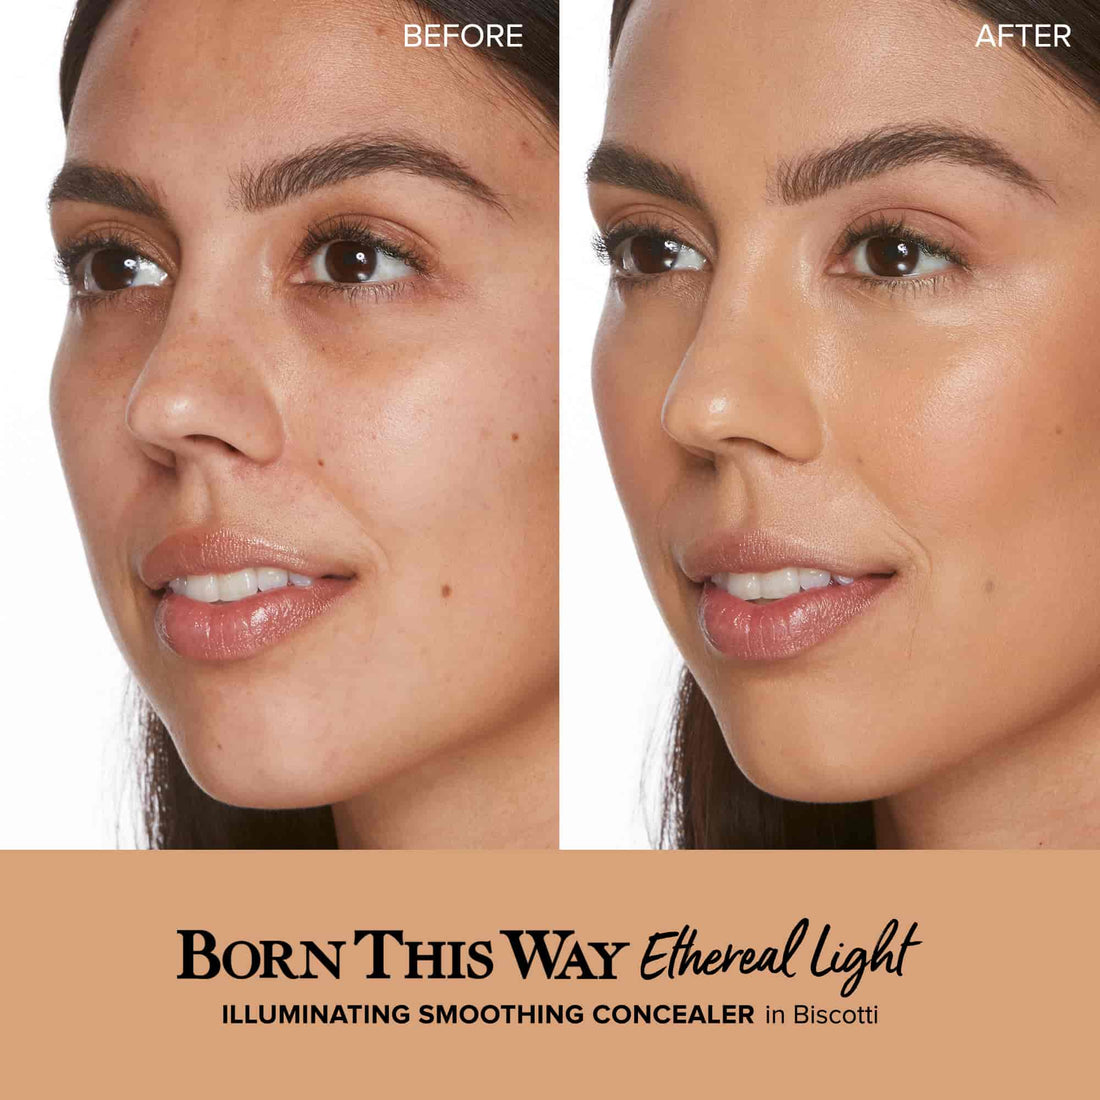 Born This Way Ethereal Light Illuminating Smoothing Concealer/ Biscotti - Too Faced.